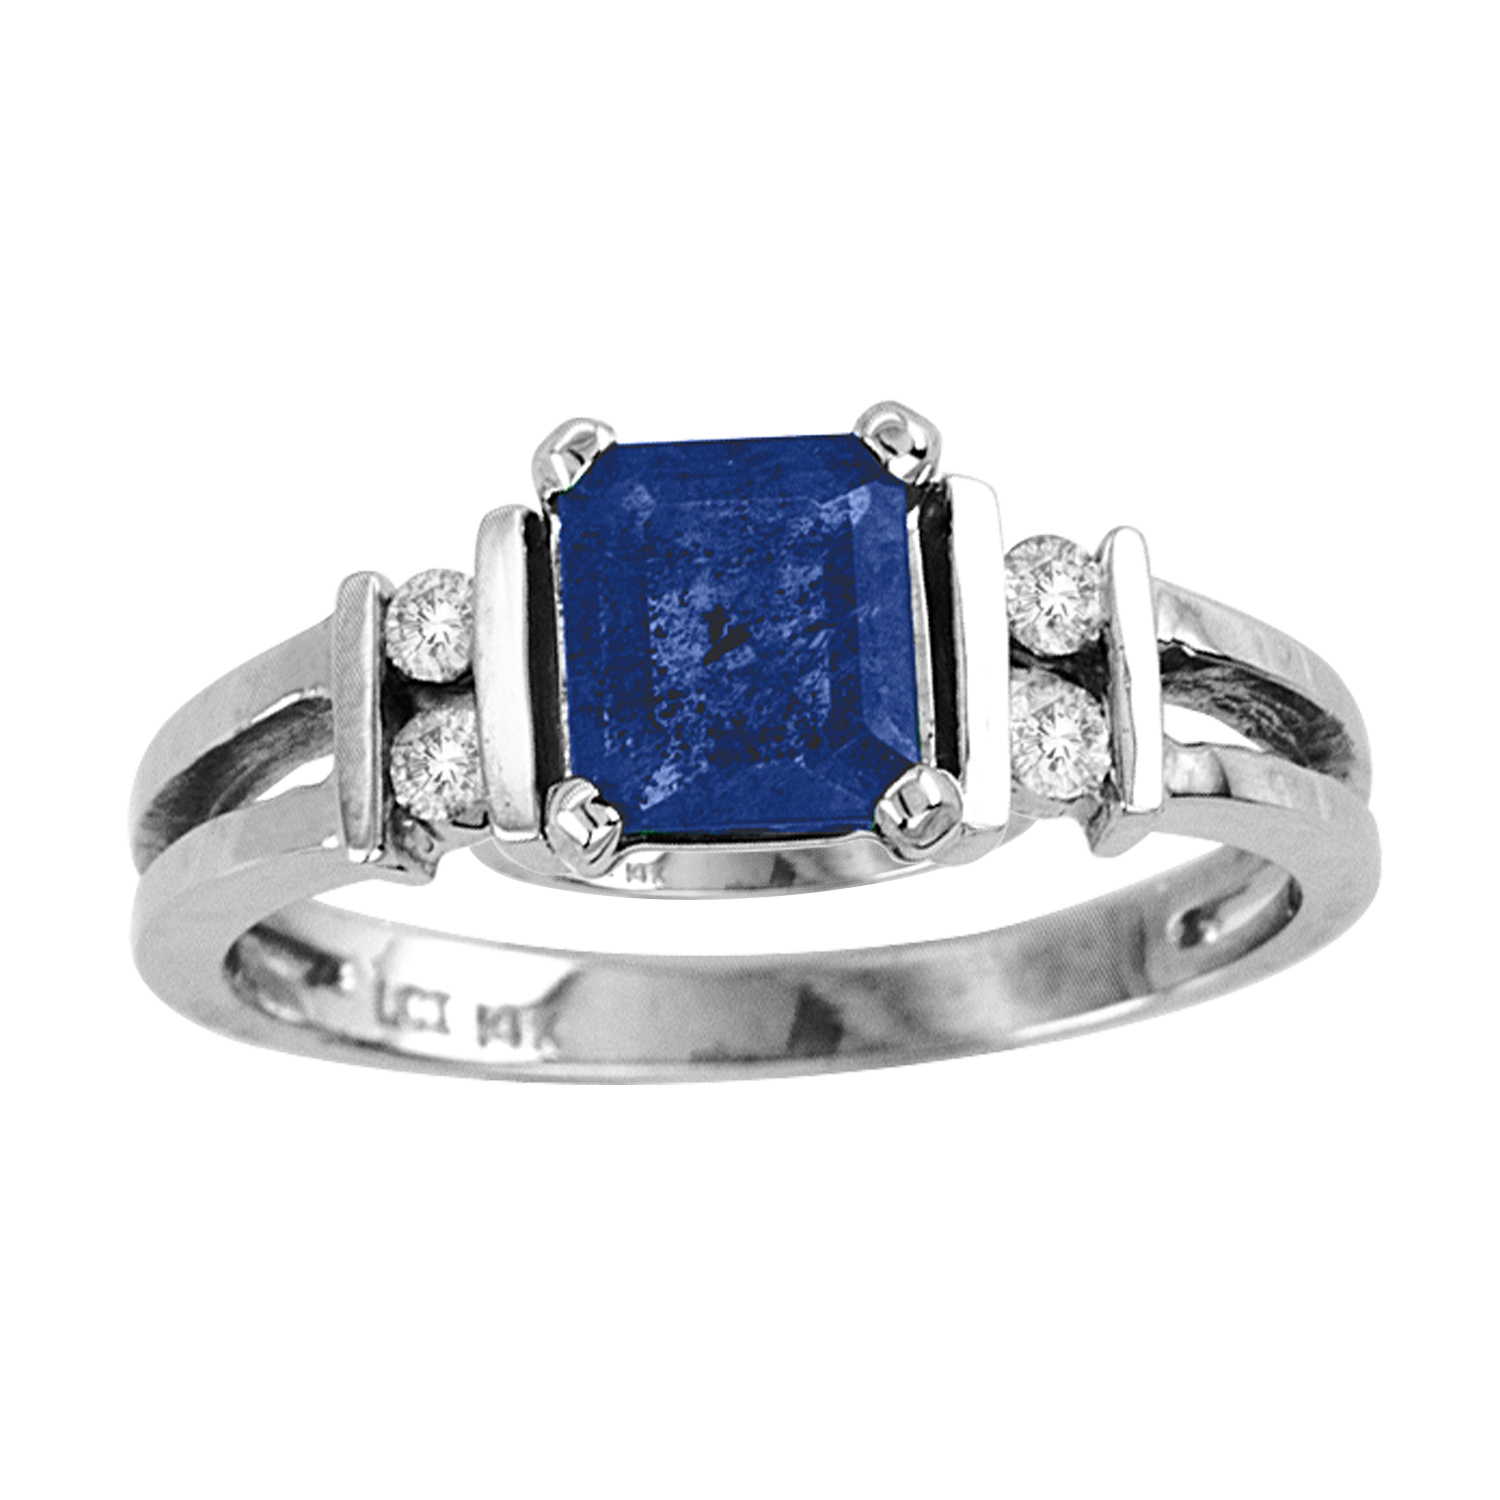 0.85cttw Diamond and Sapphire Ring set in 14k Gold